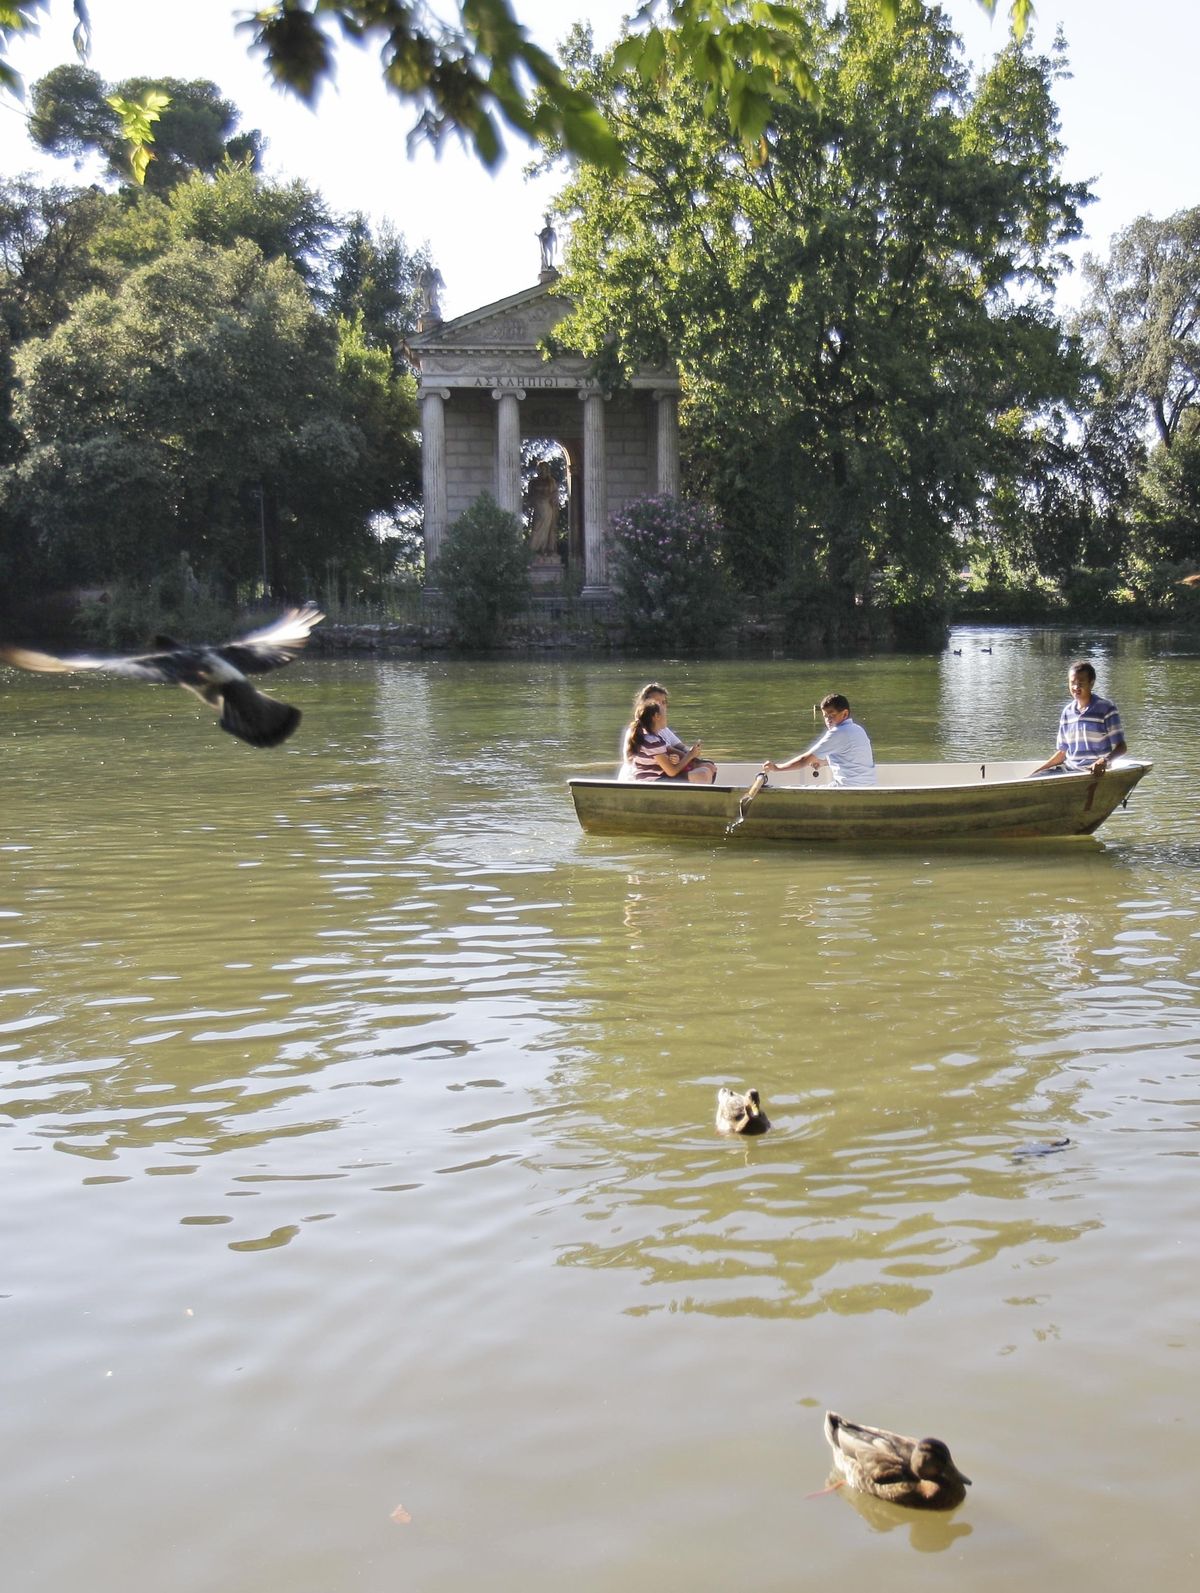  A view of the lake at Villa Borghese in Rome. In the book “Eat, Pray, Love,” author Elizabeth Gilbert identifies it as one of her favorite fountains in Rome. 